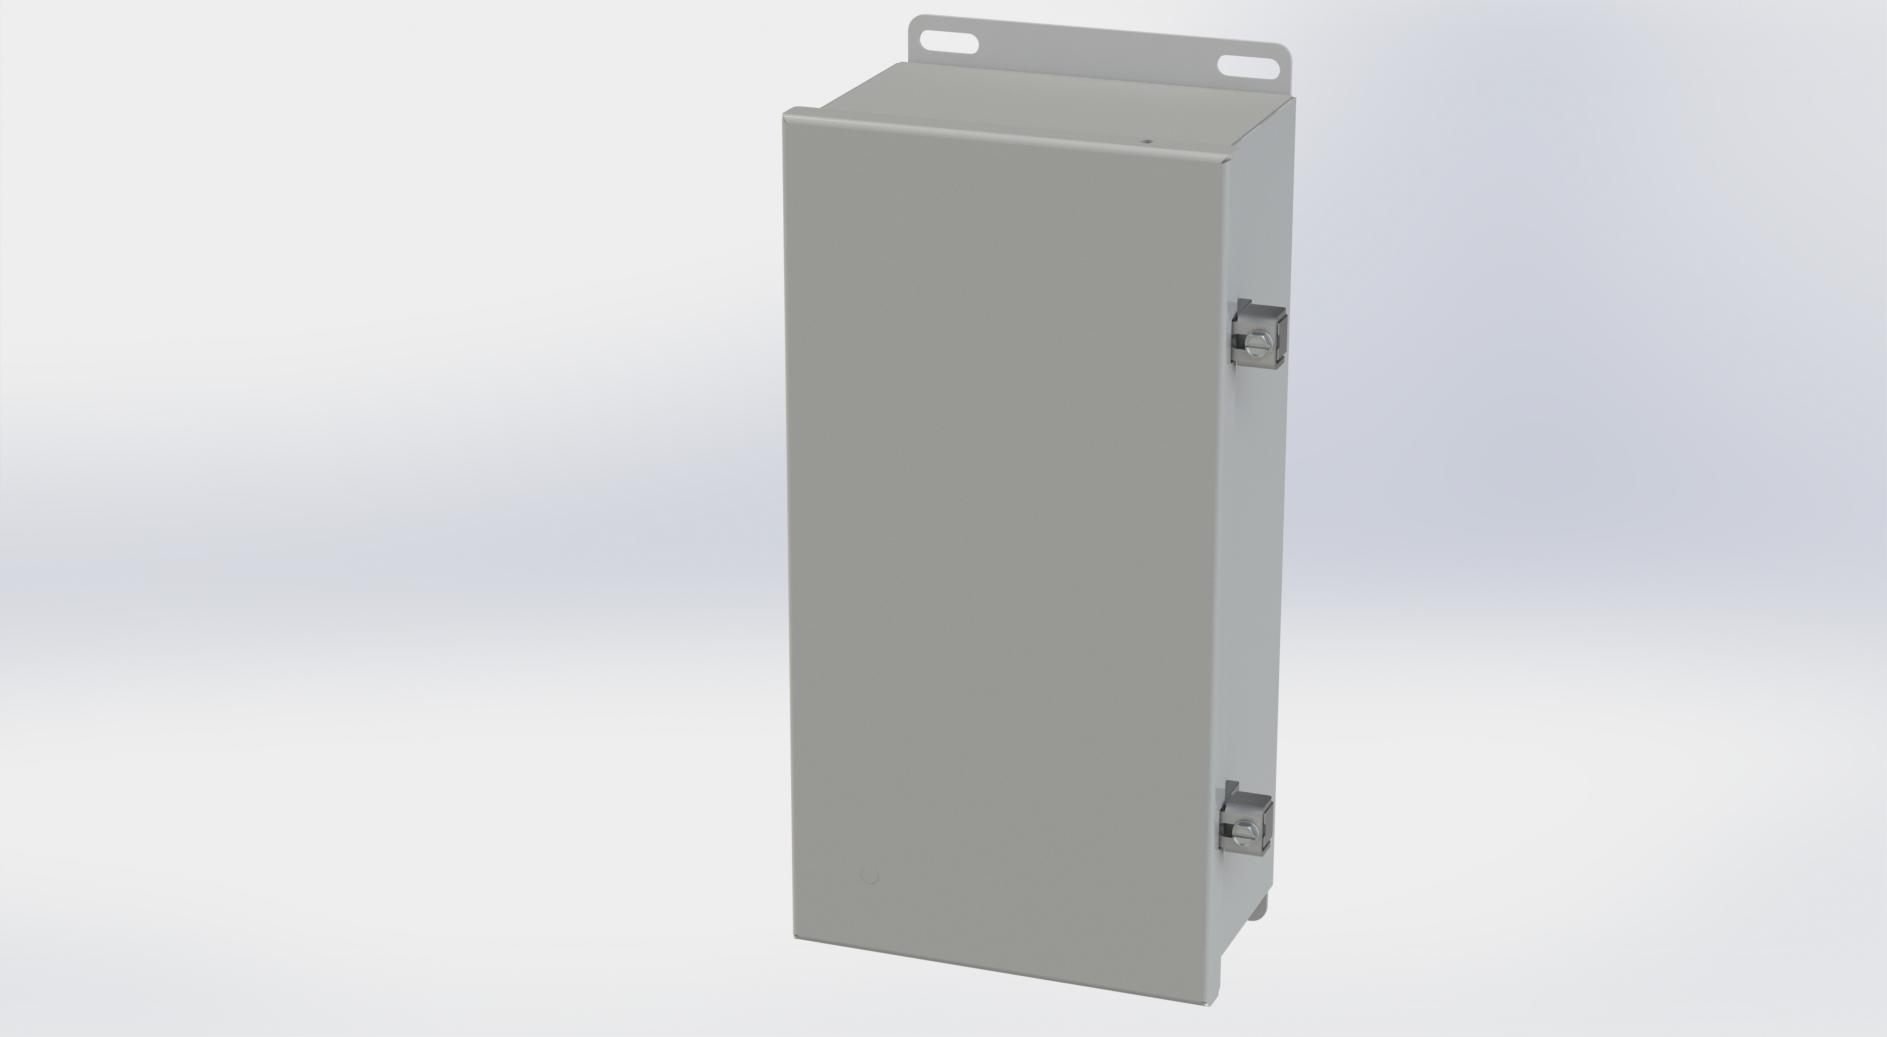 Saginaw Control SCE-12064CHNF CHNF Enclosure, Height:12.13", Width:6.00", Depth:4.00", ANSI-61 gray powder coating inside and out. Optional sub-panels are powder coated white.